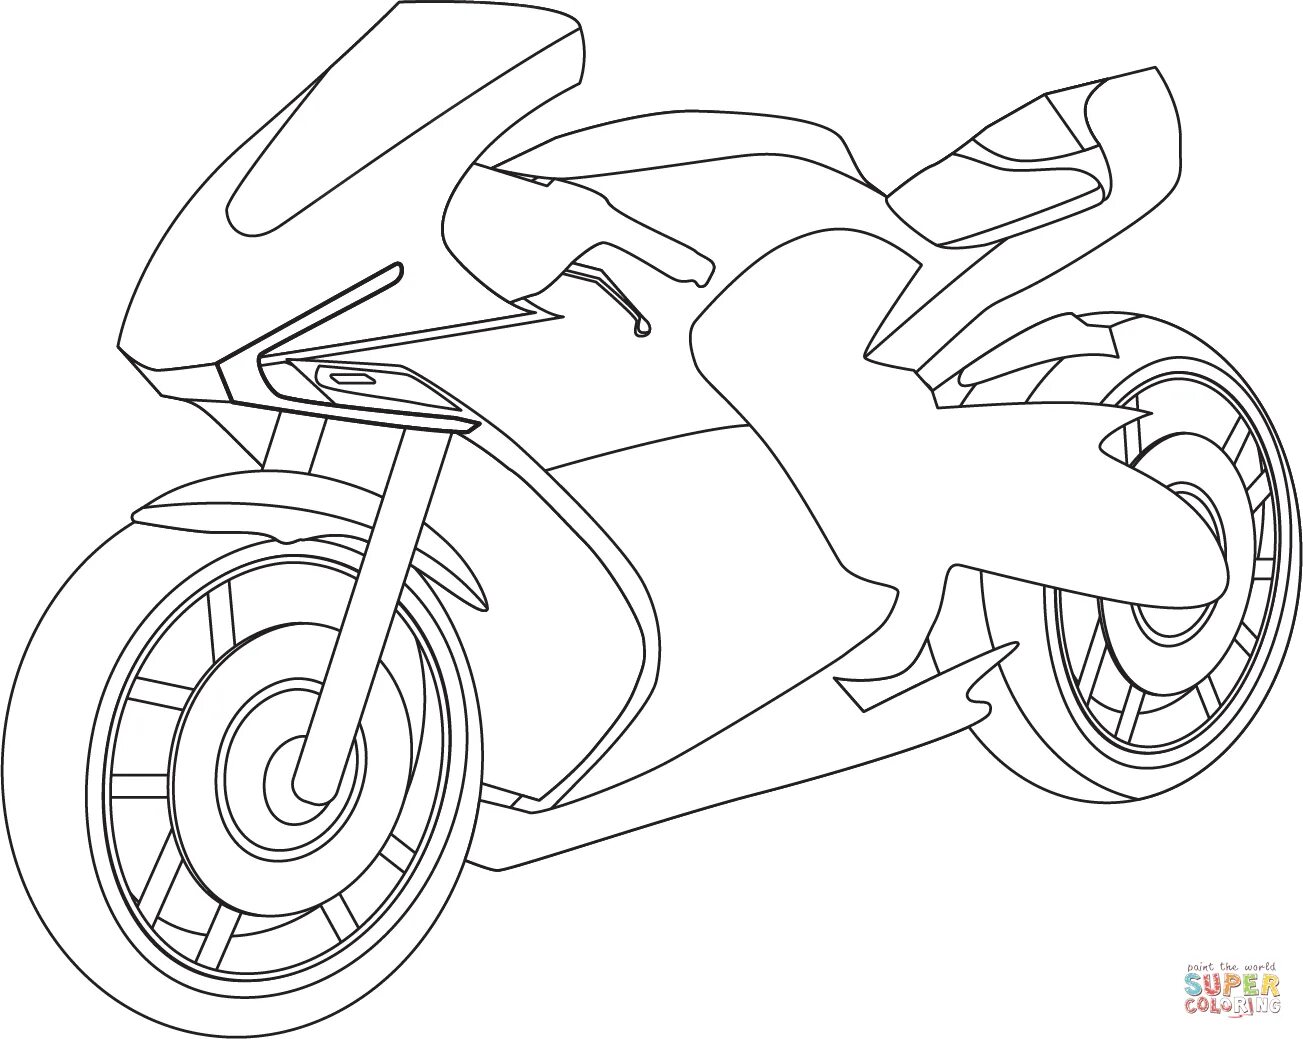 Exciting motorcycle coloring book for 3-4 year olds